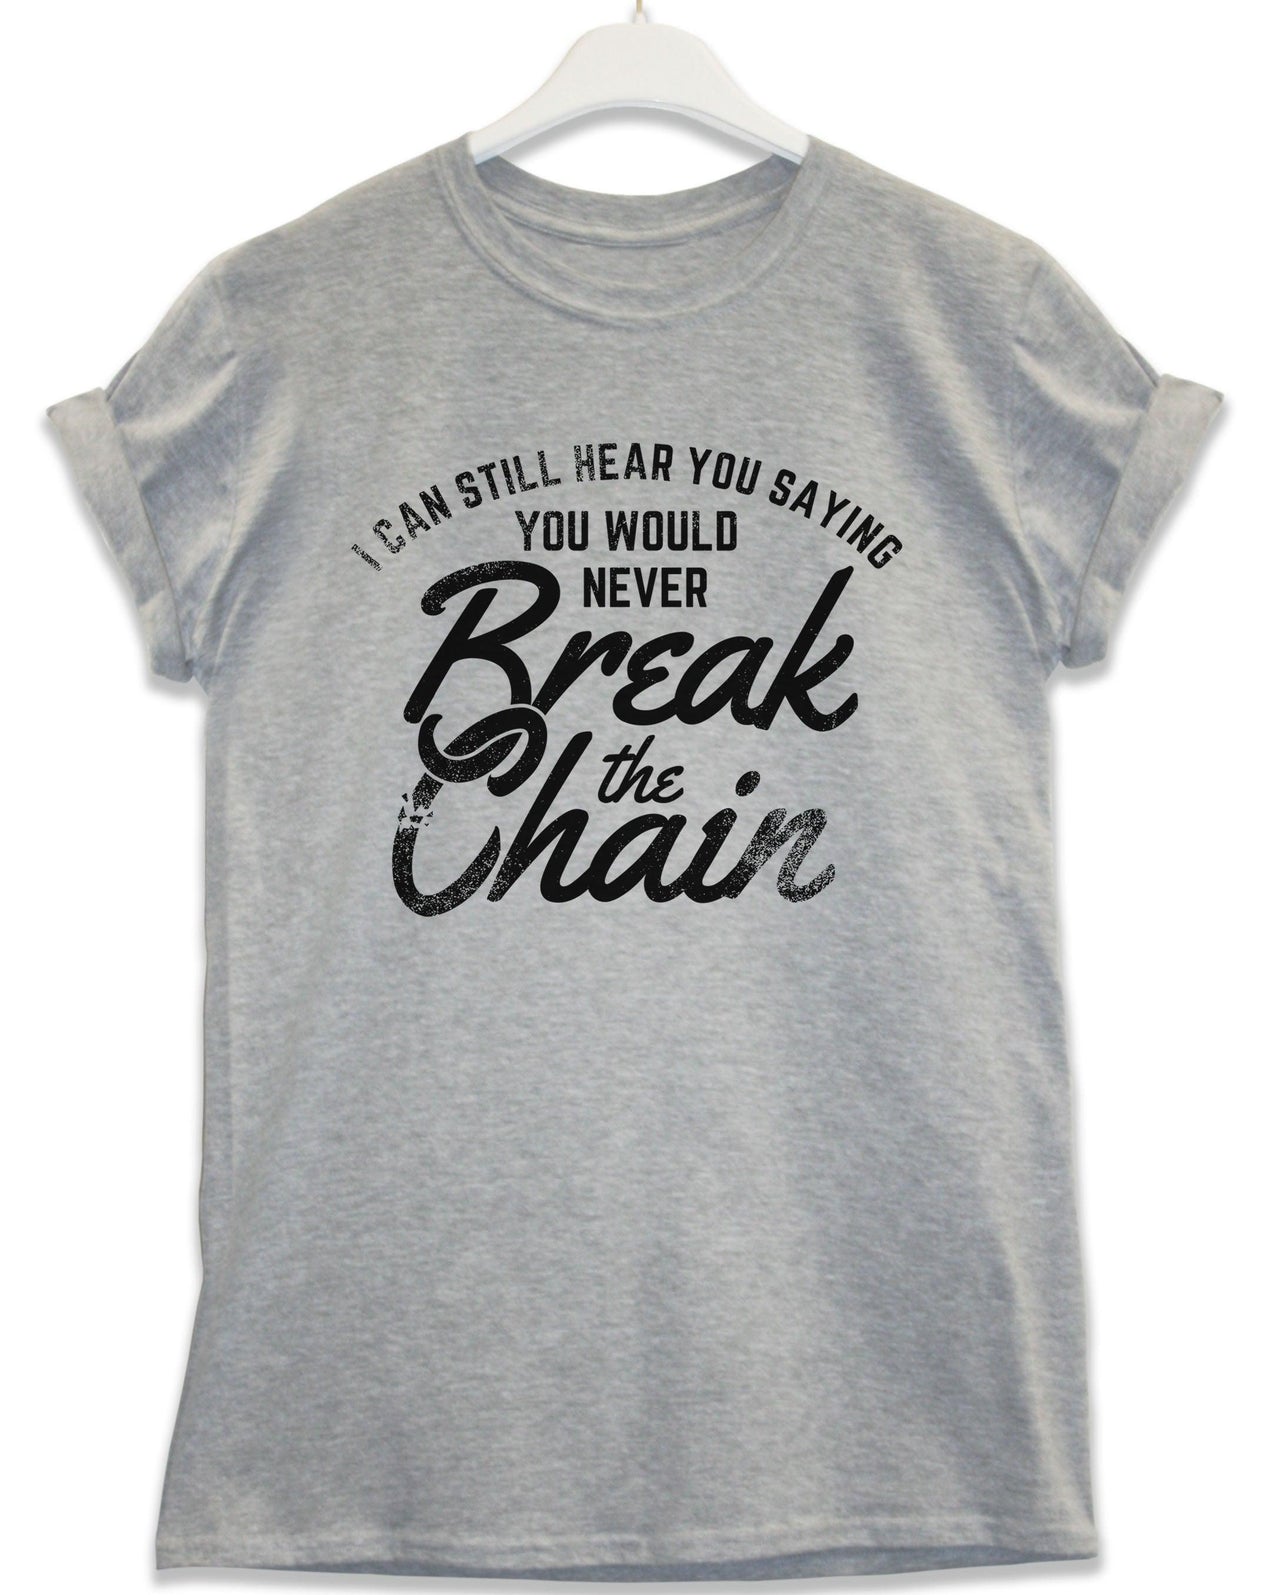 Break the Chain Lyric Quote Unisex T-Shirt For Men And Women 8Ball